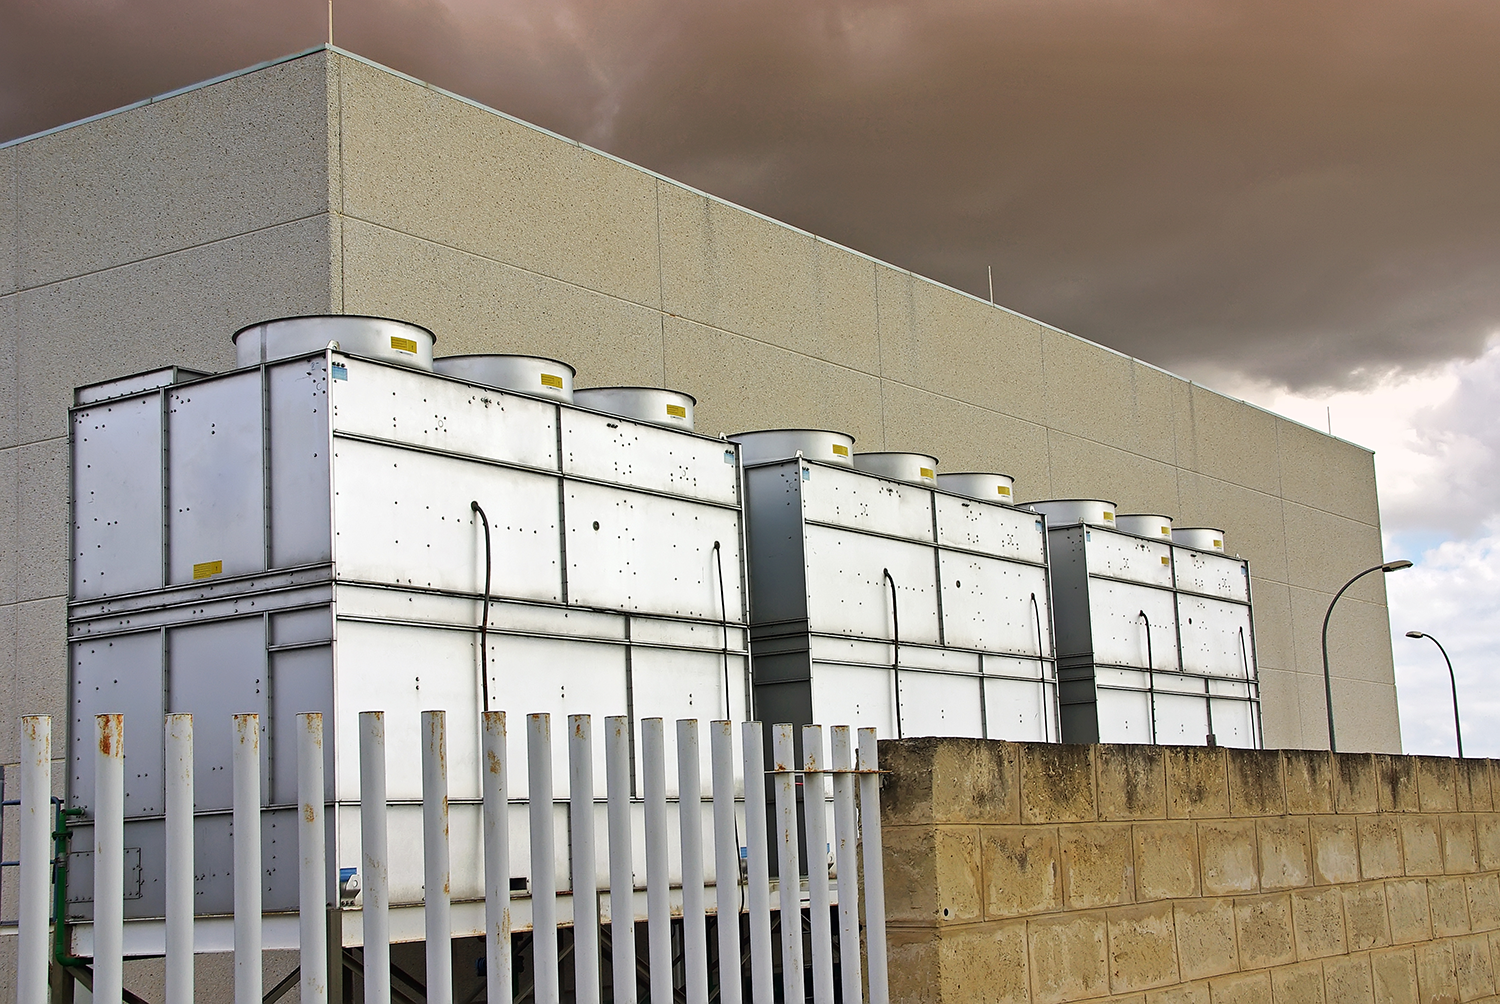 three cooling tower units on the roof - cooling tower experts